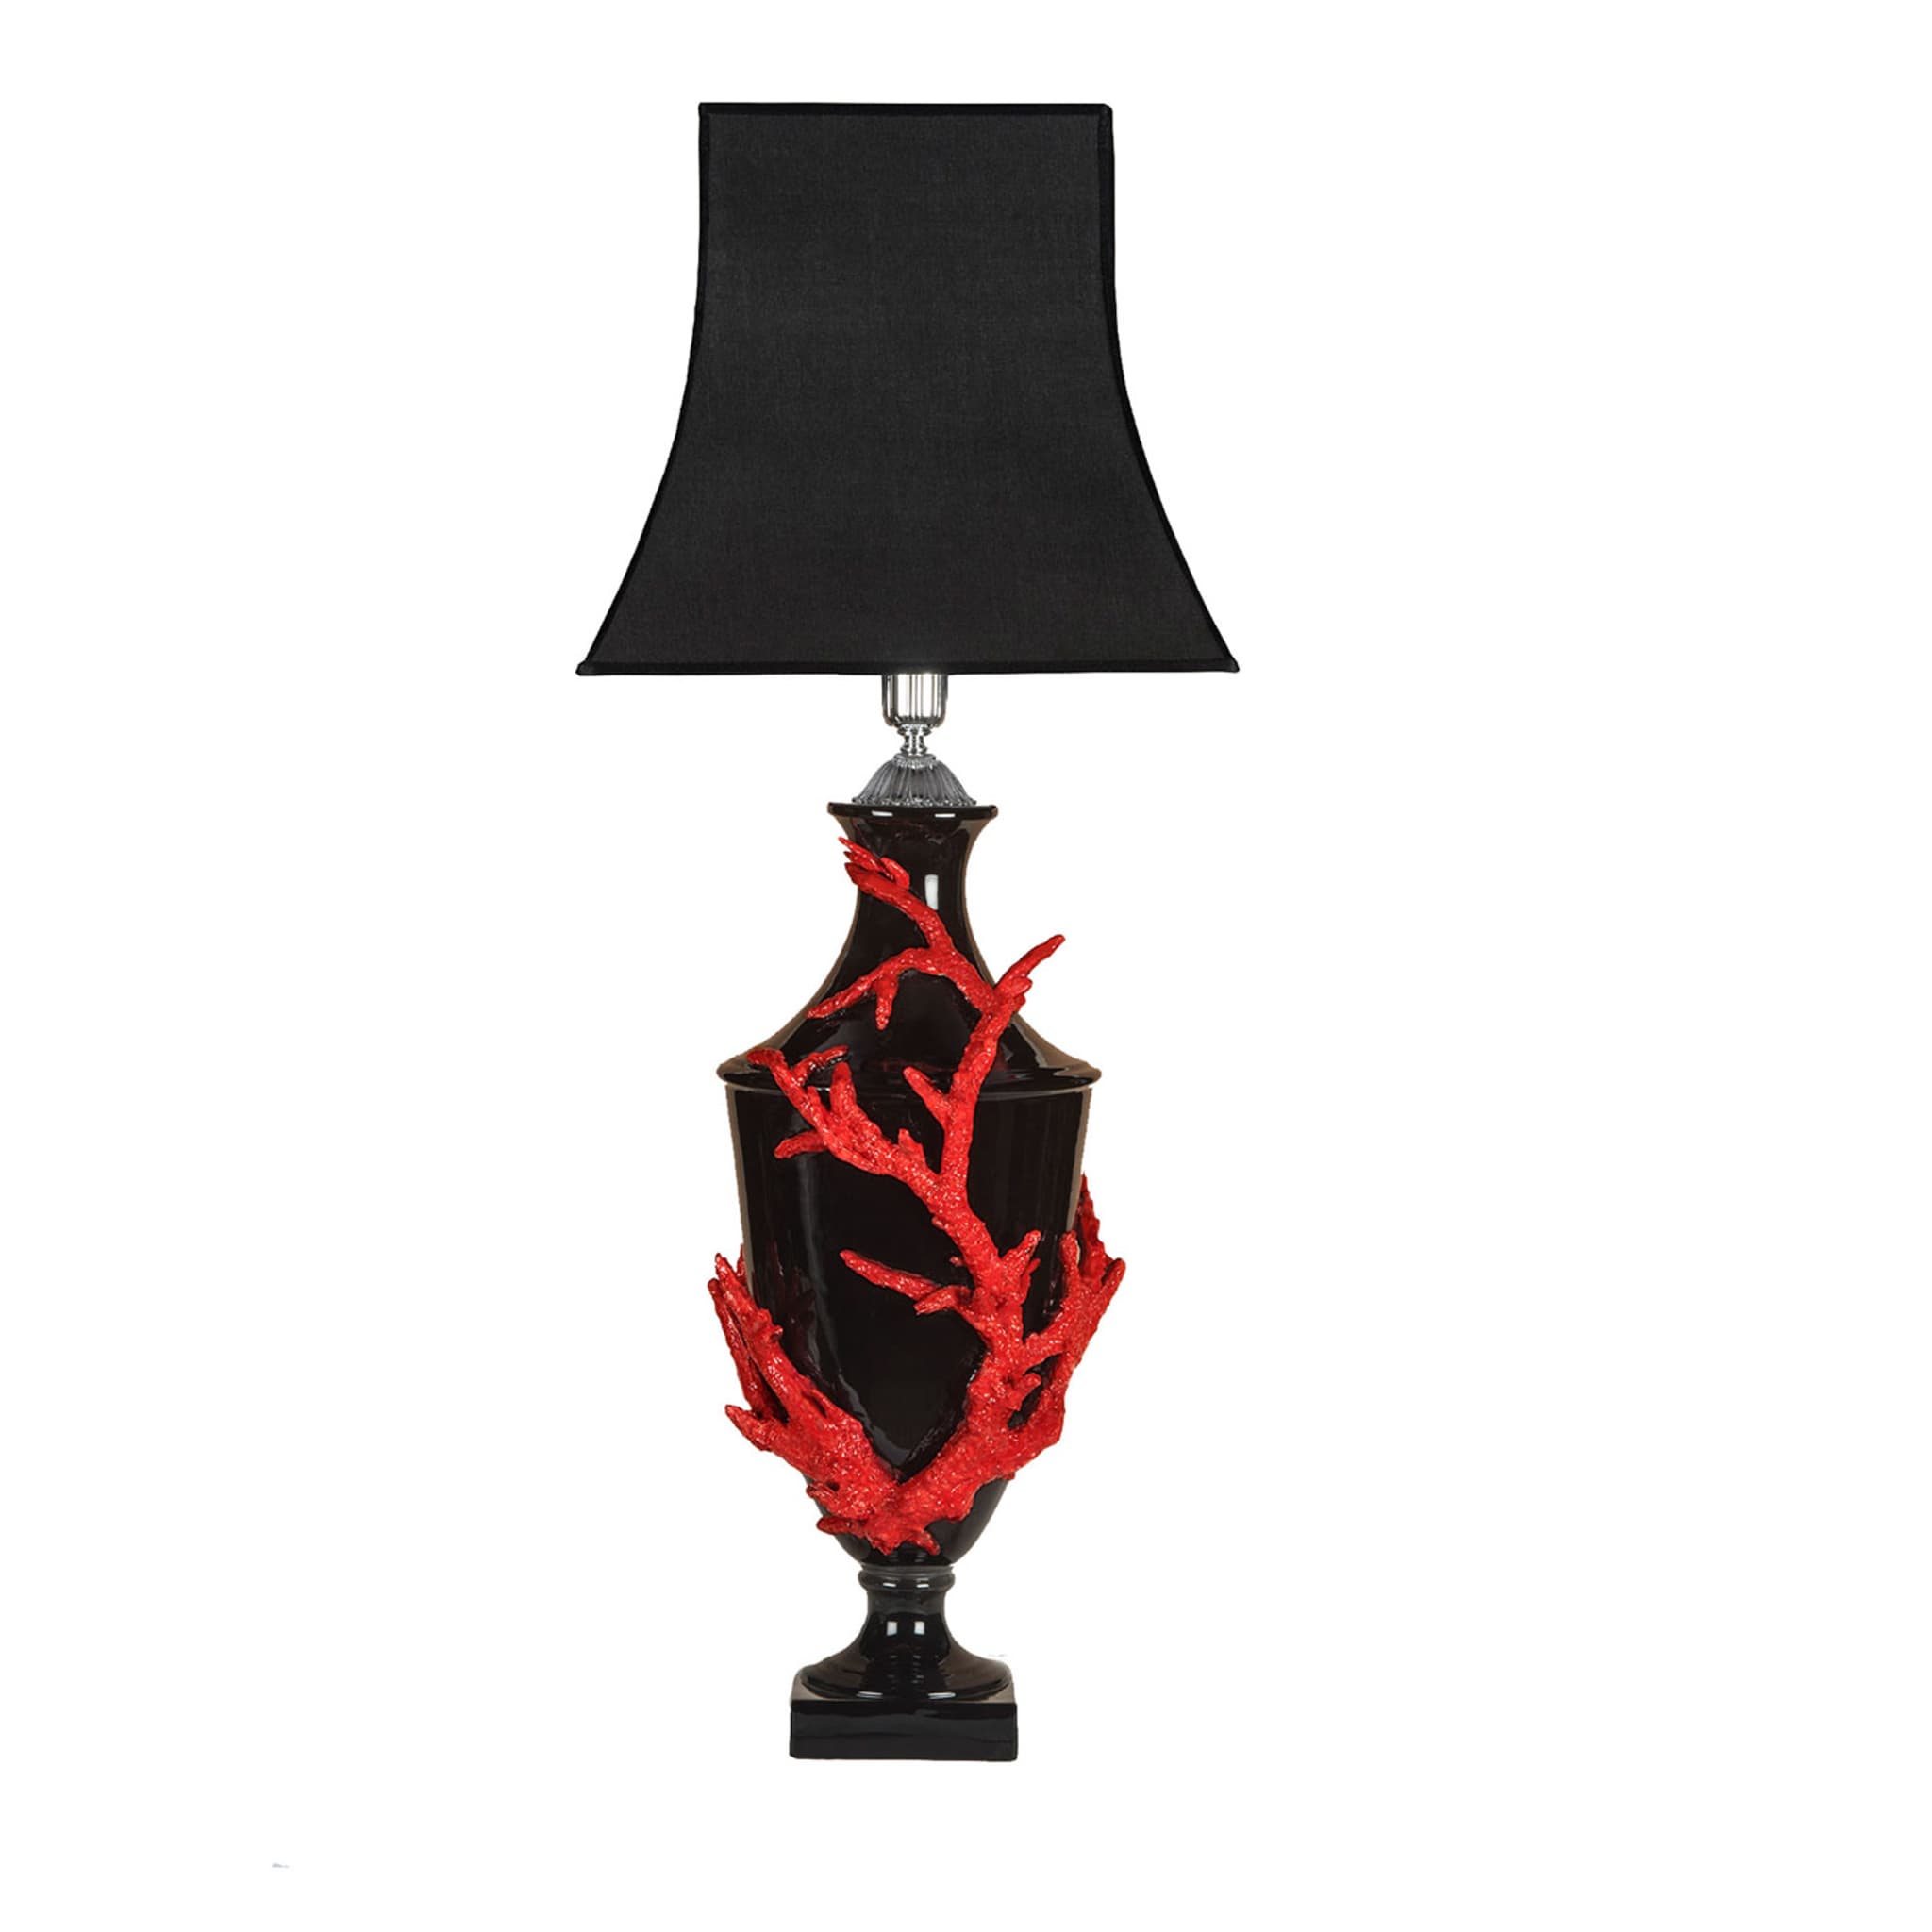 Mare Black & Red Table Lamp by Antonio Fullin - Main view